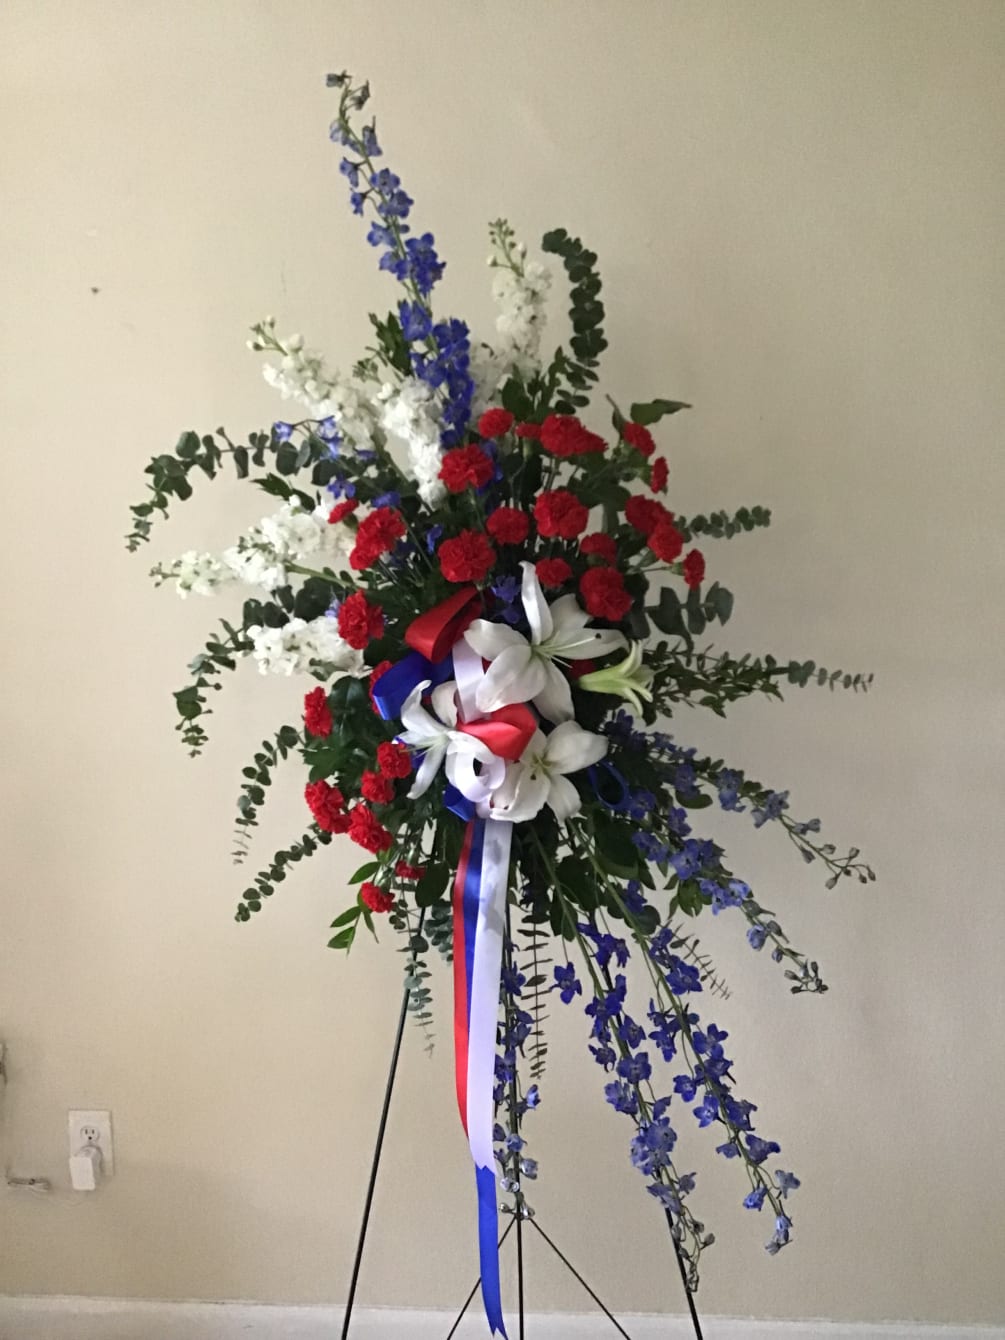 Beautiful blue delphinium, red carnations, white stocks, white lilies and greenery with